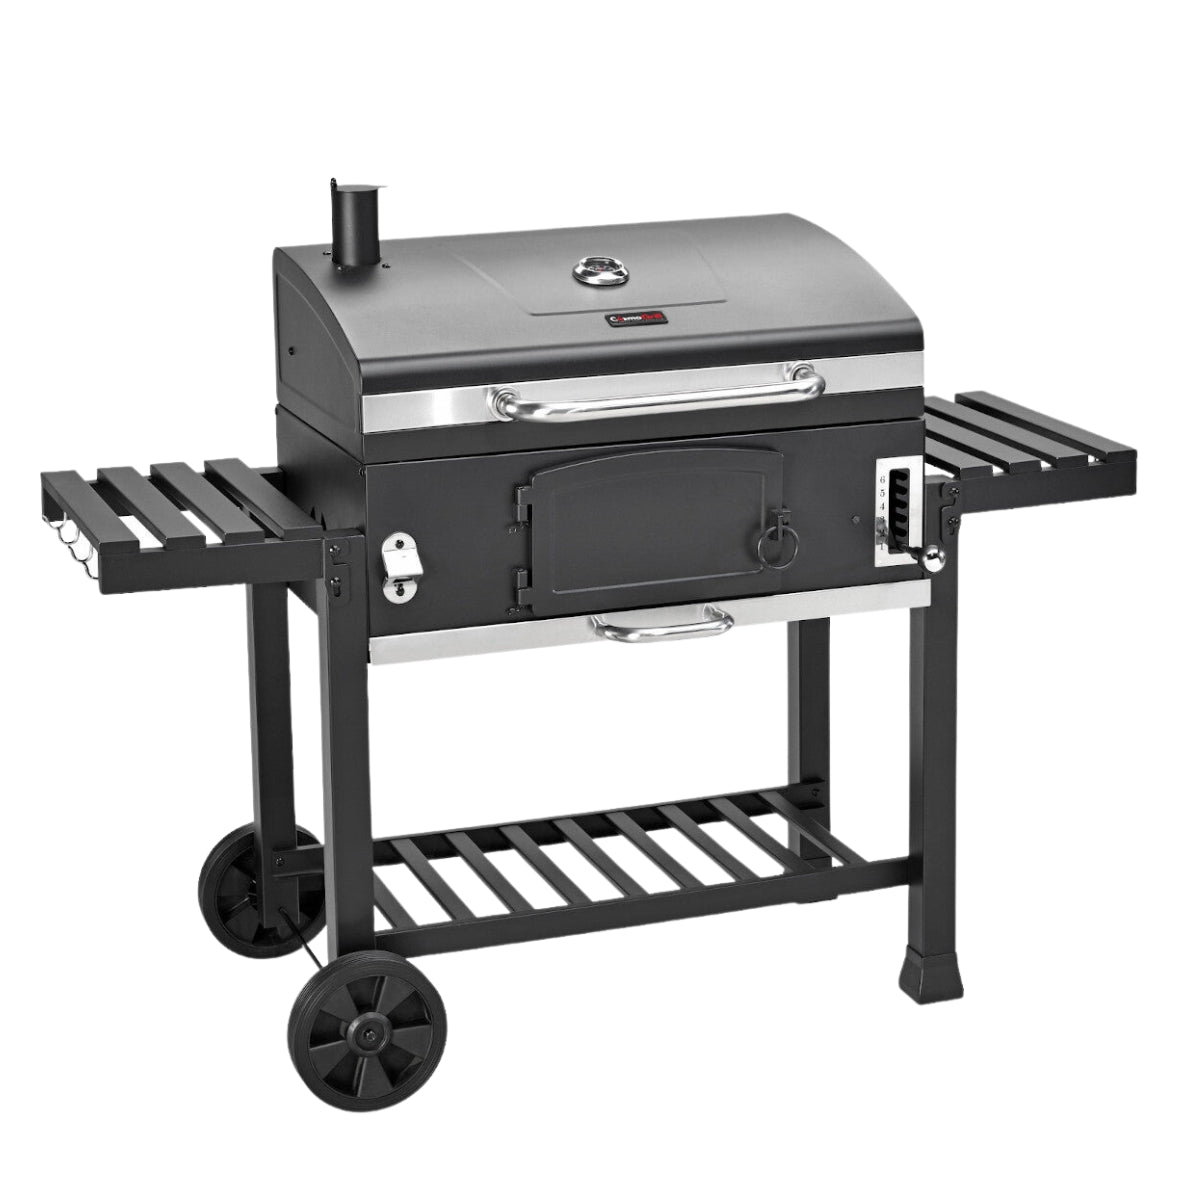 XXL Smoker Charcoal Barbecue + Cover